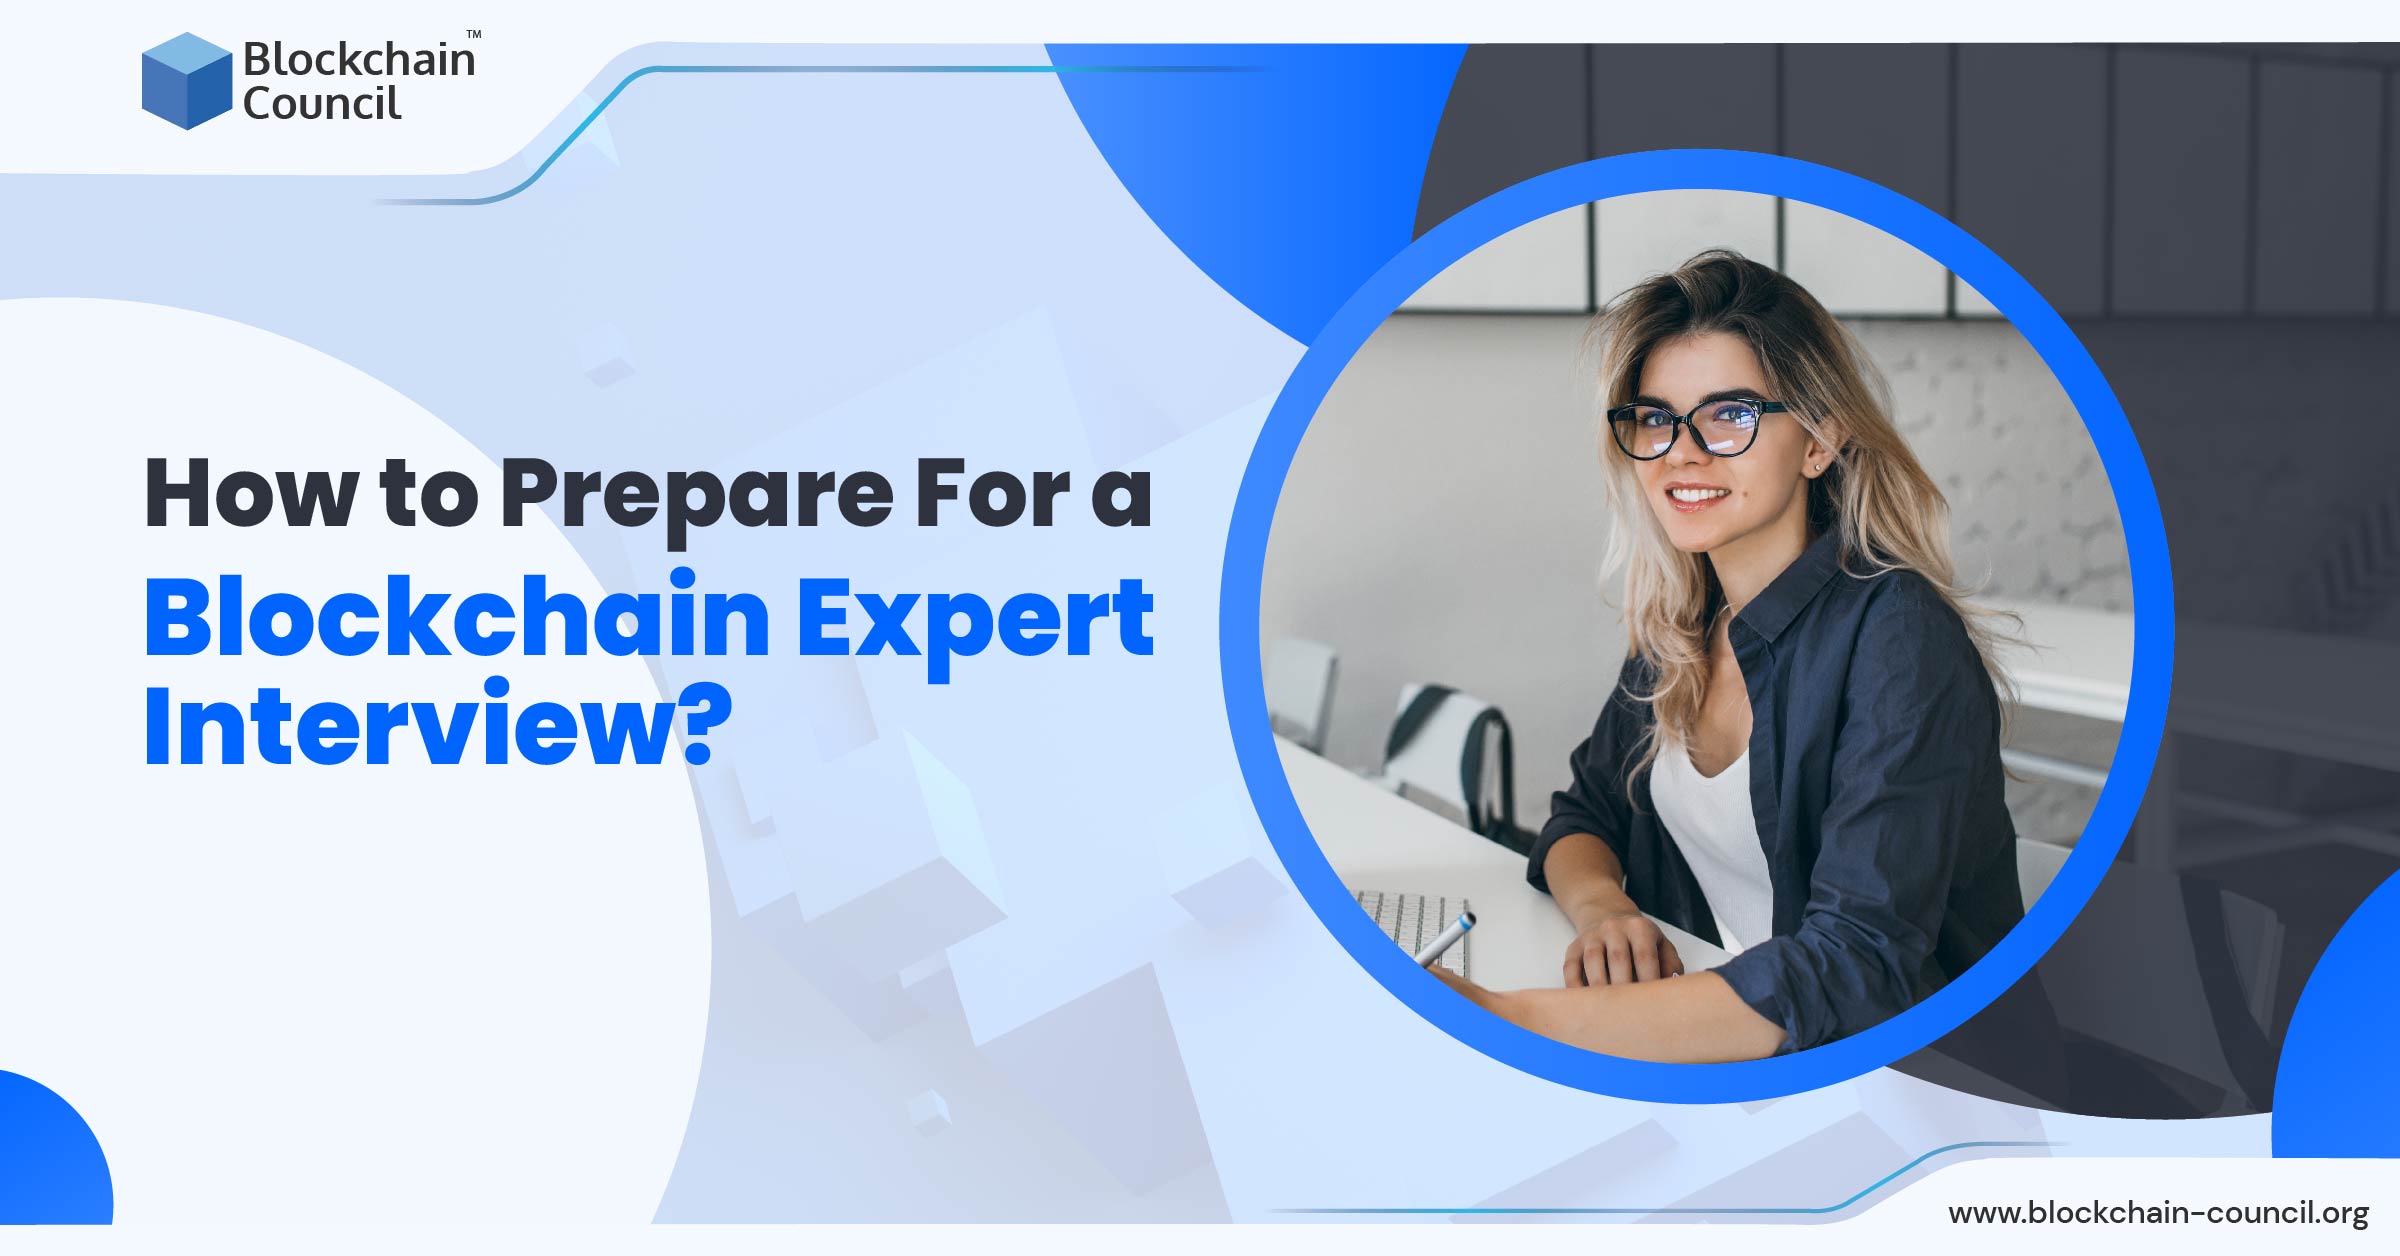 How to Prepare For a Blockchain Expert Interview